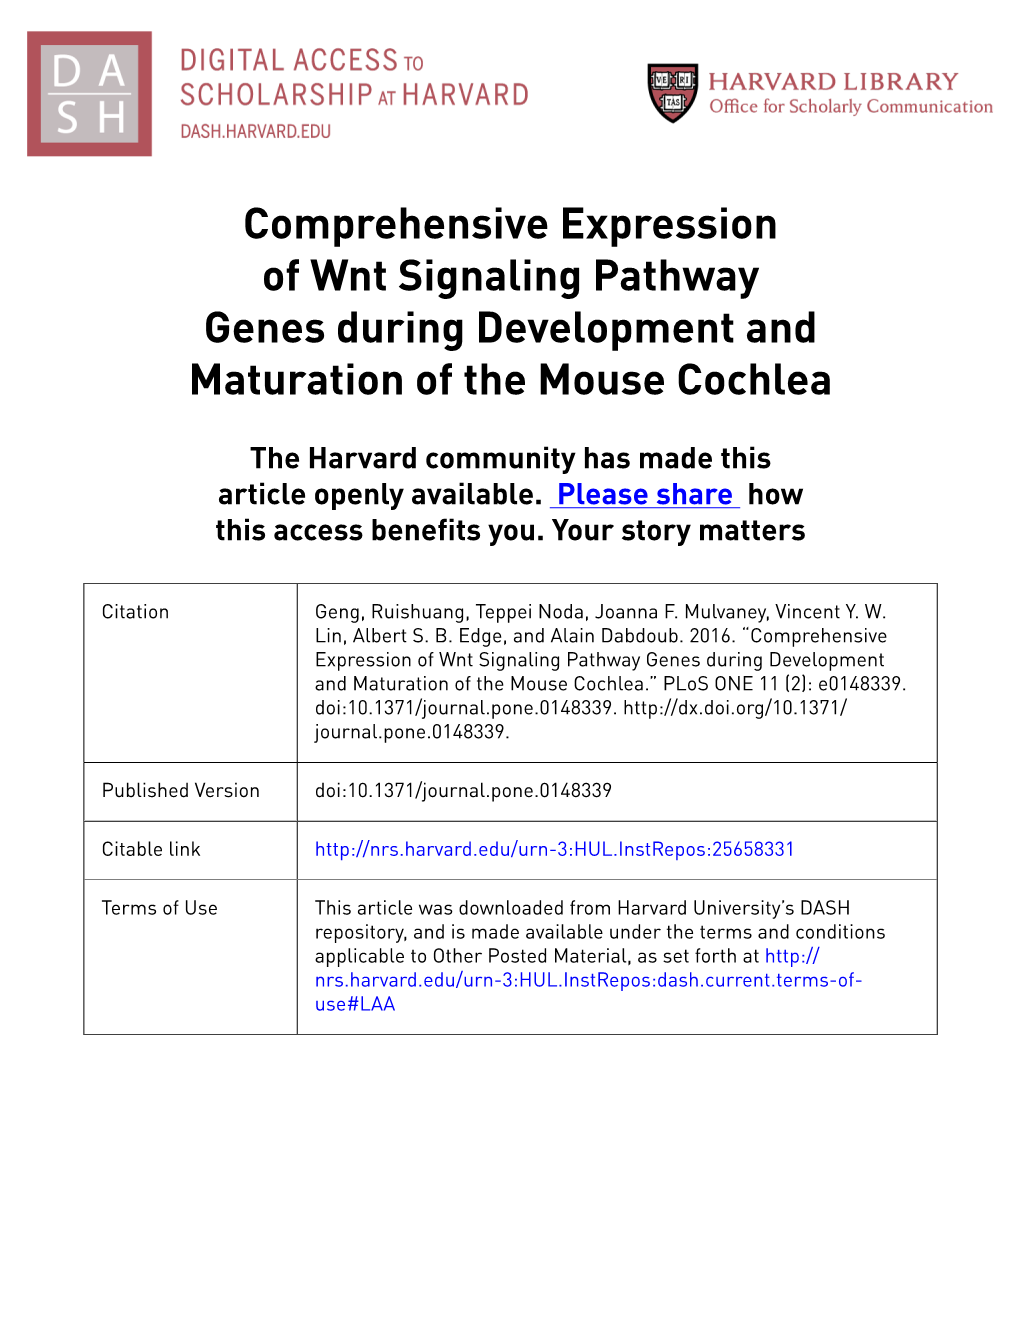 Comprehensive Expression of Wnt Signaling Pathway Genes During Development and Maturation of the Mouse Cochlea